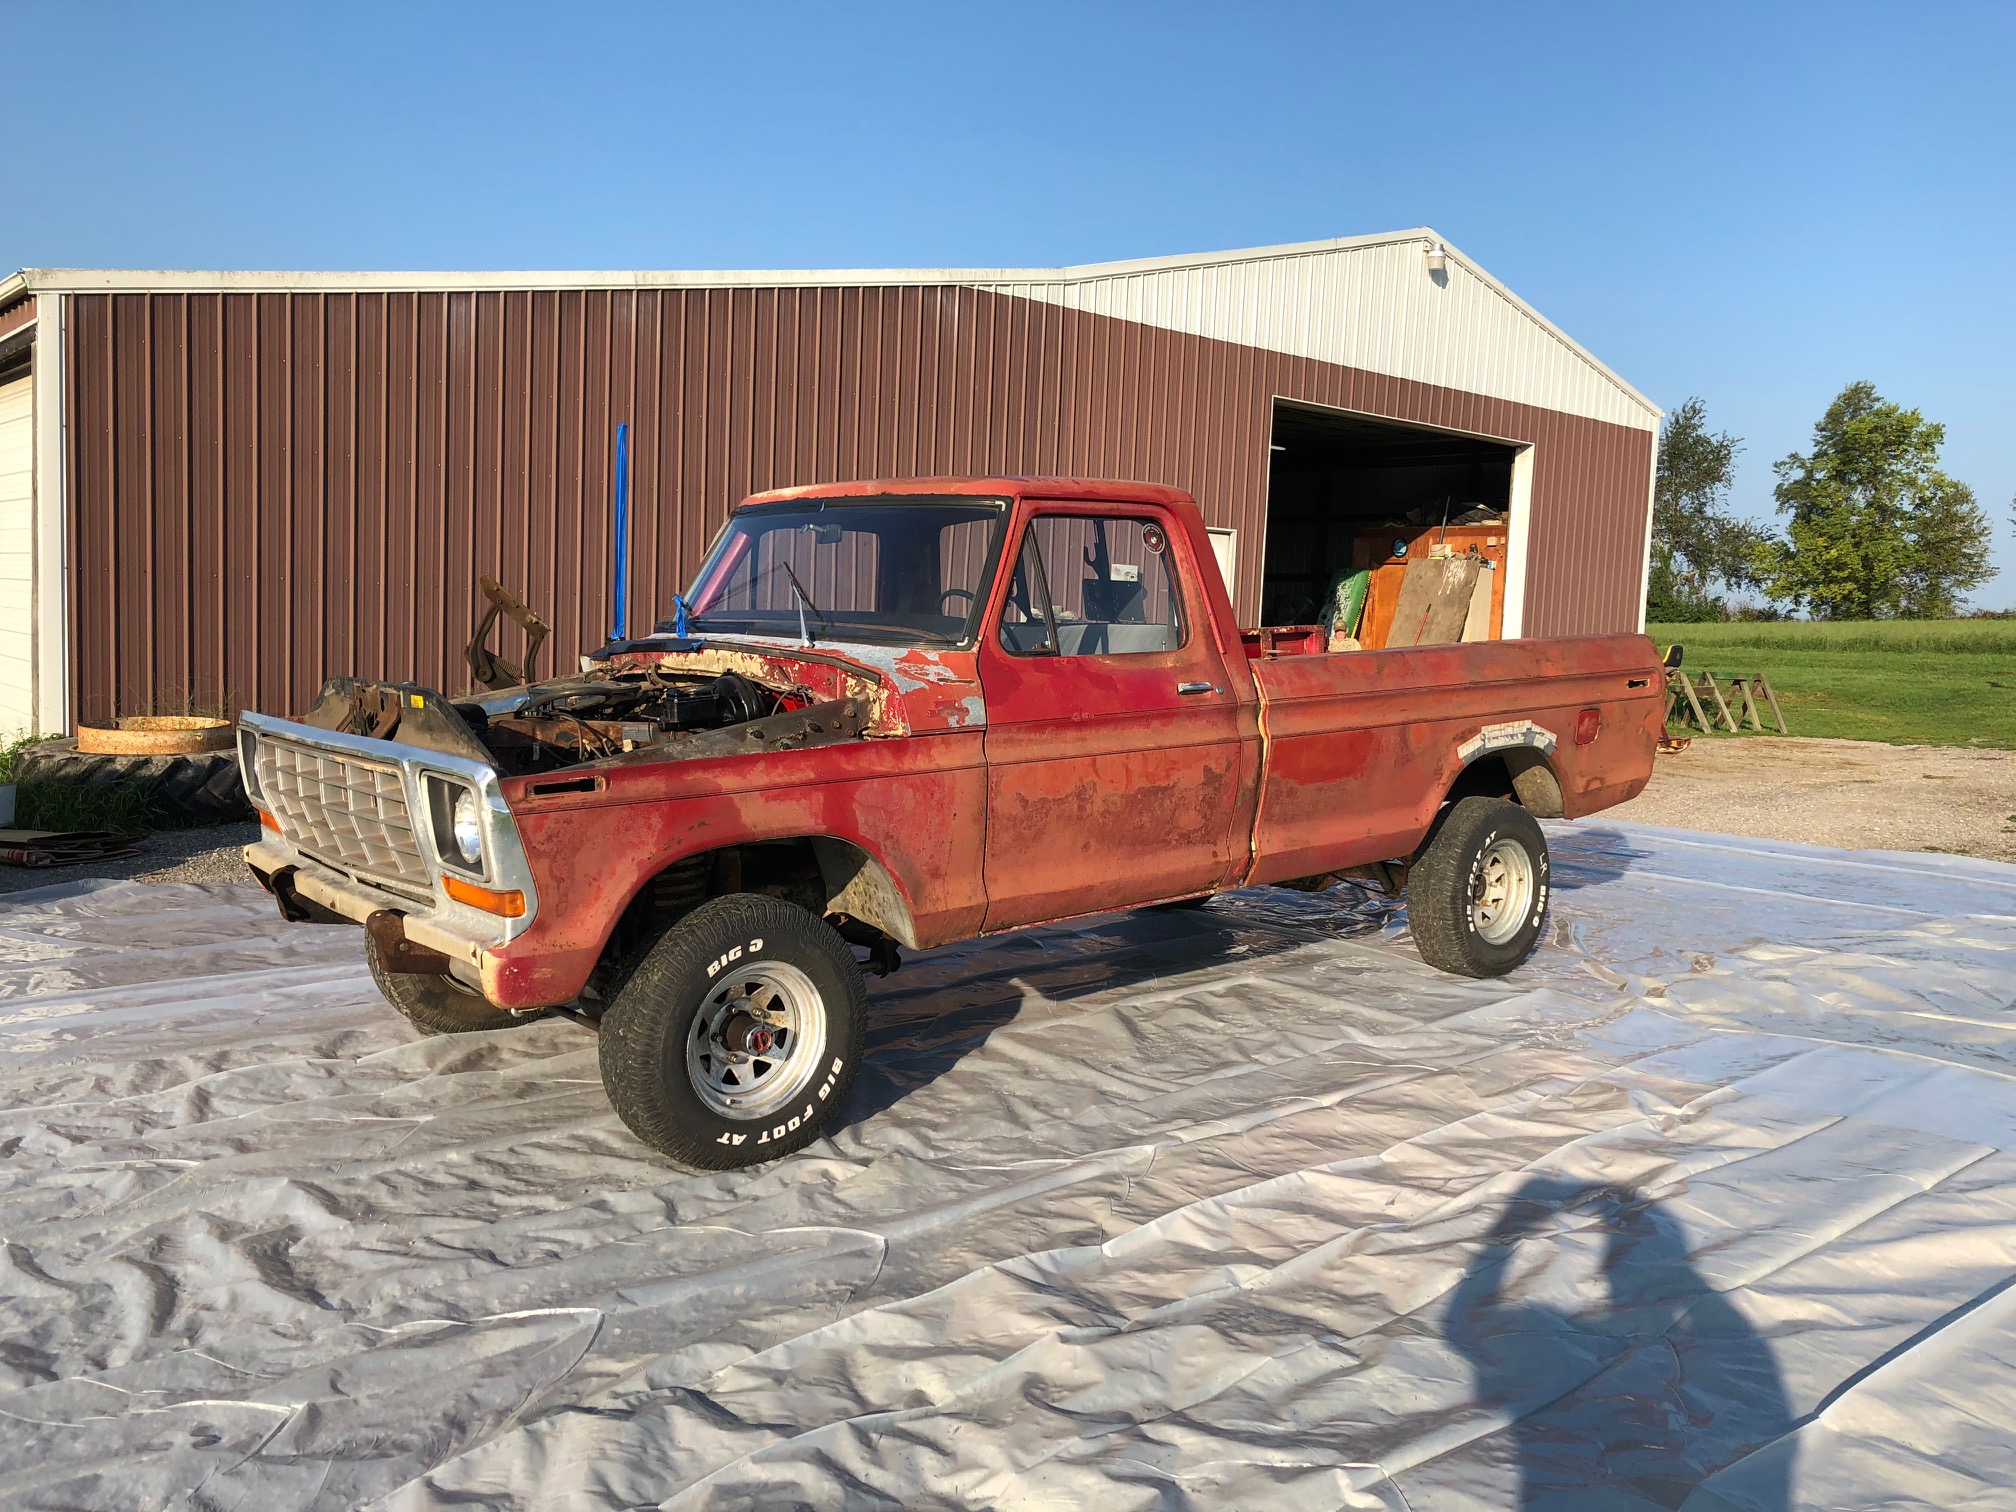 70's Ford Pickup Truck Before